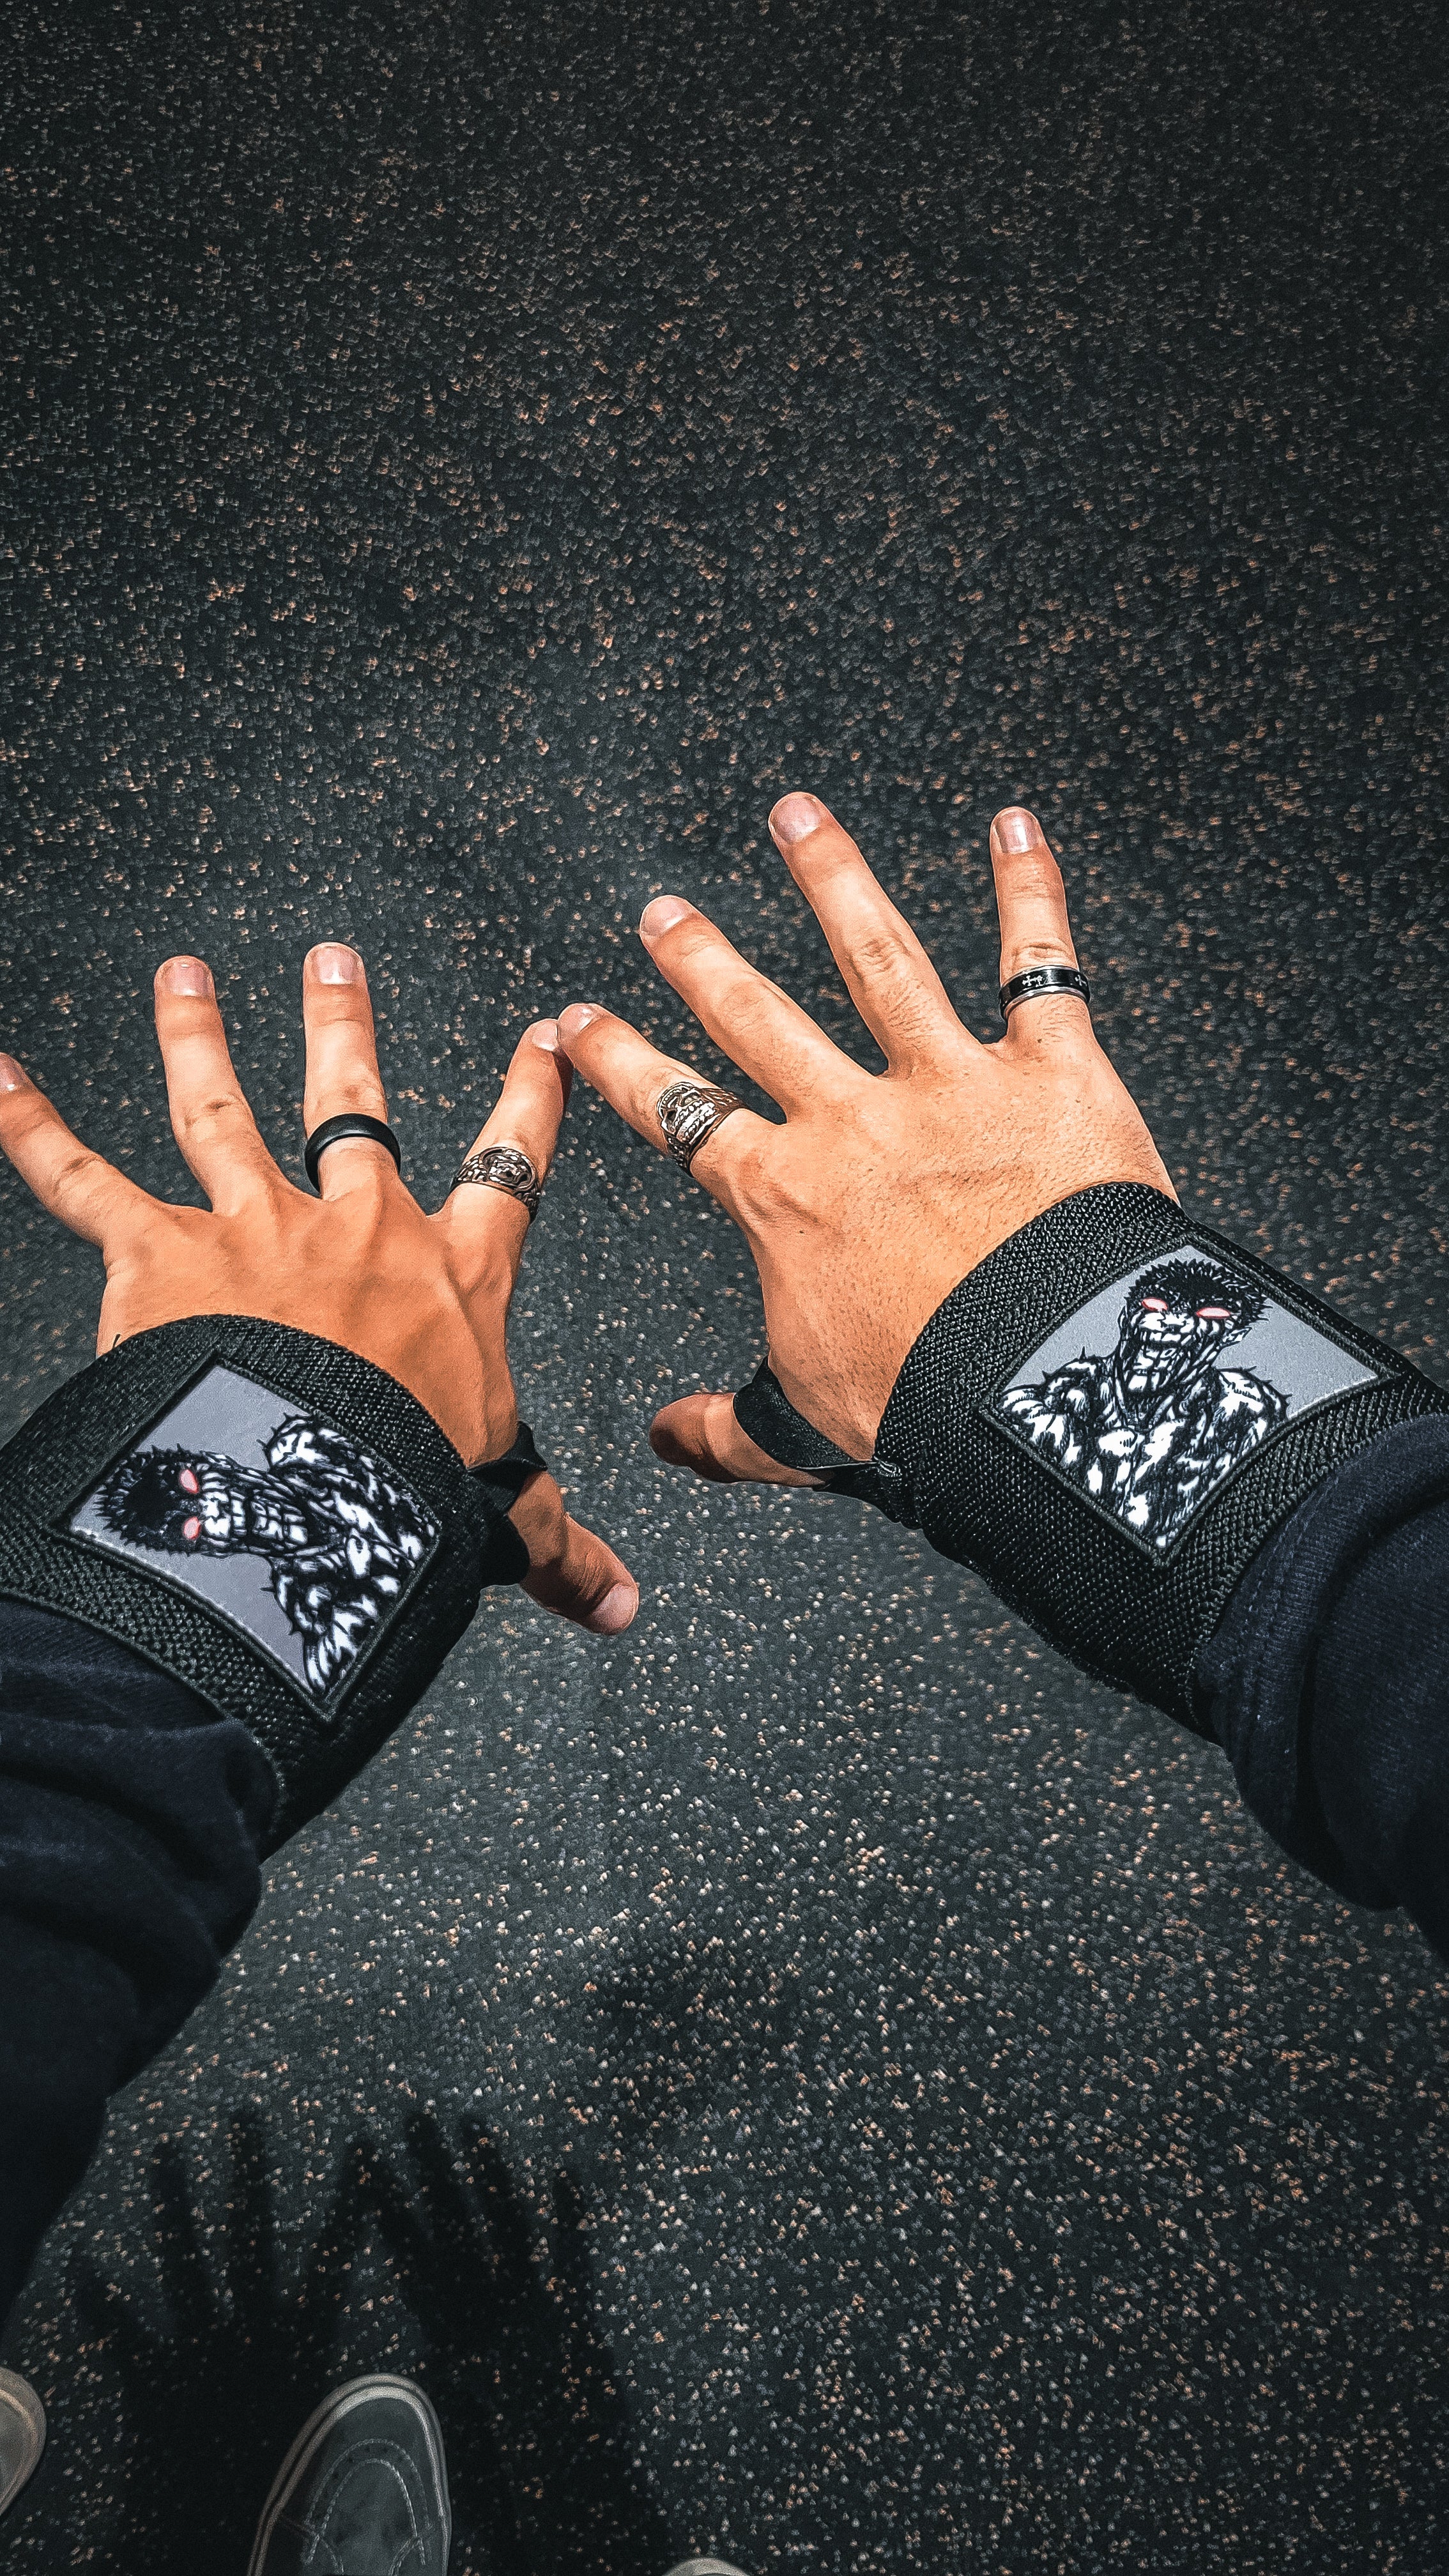 Amazon.com : ベルセルク Berserk Lifting Straps - 1 Pair Of Anime Lifting Straps,  Perfect for Strength Athletes, Powerlifters and Crossfit who love Berserk  Anime : Sports & Outdoors